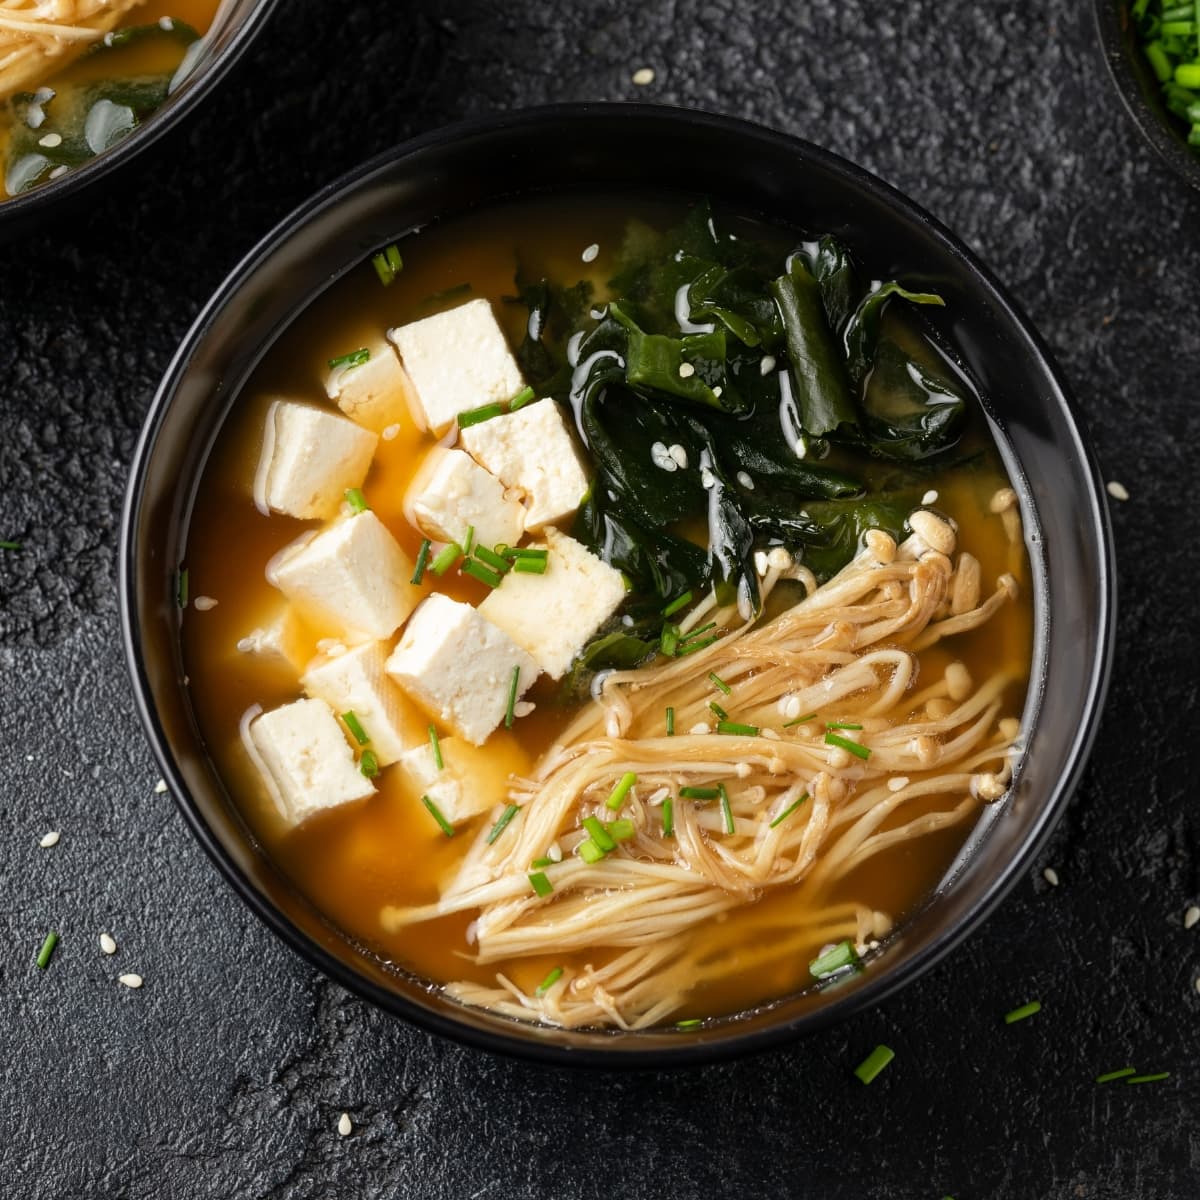 Bowl of Warm Miso Soup with Tofu, Seaweeds and Mushrooms